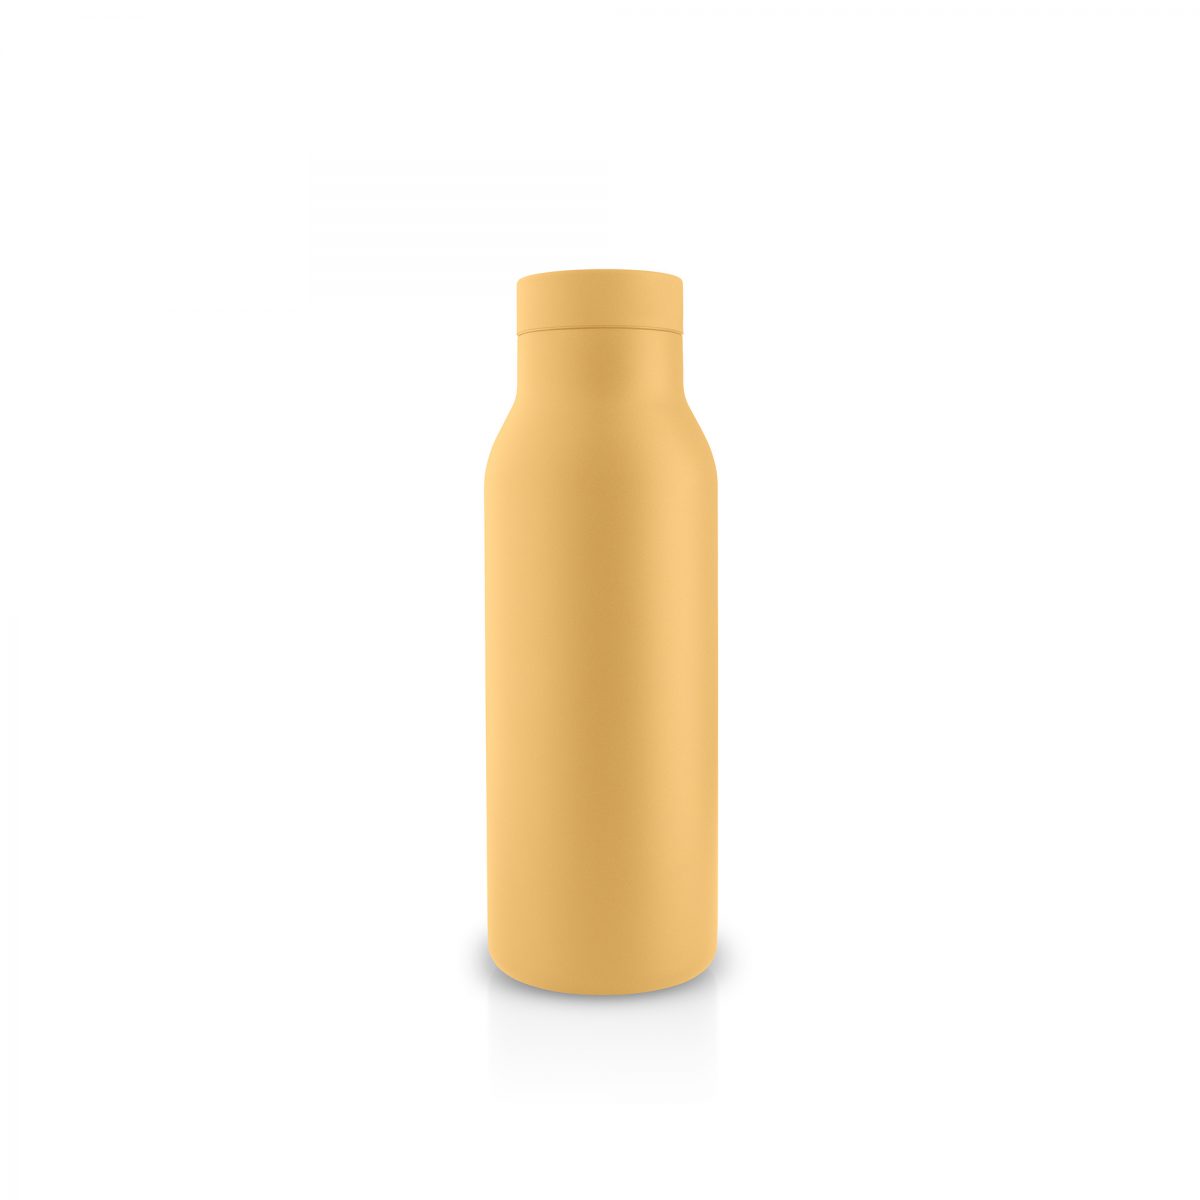 575026_Urban_Thermo_flask_05l_Golden_Sand_lige_paa_WS_2000x2000